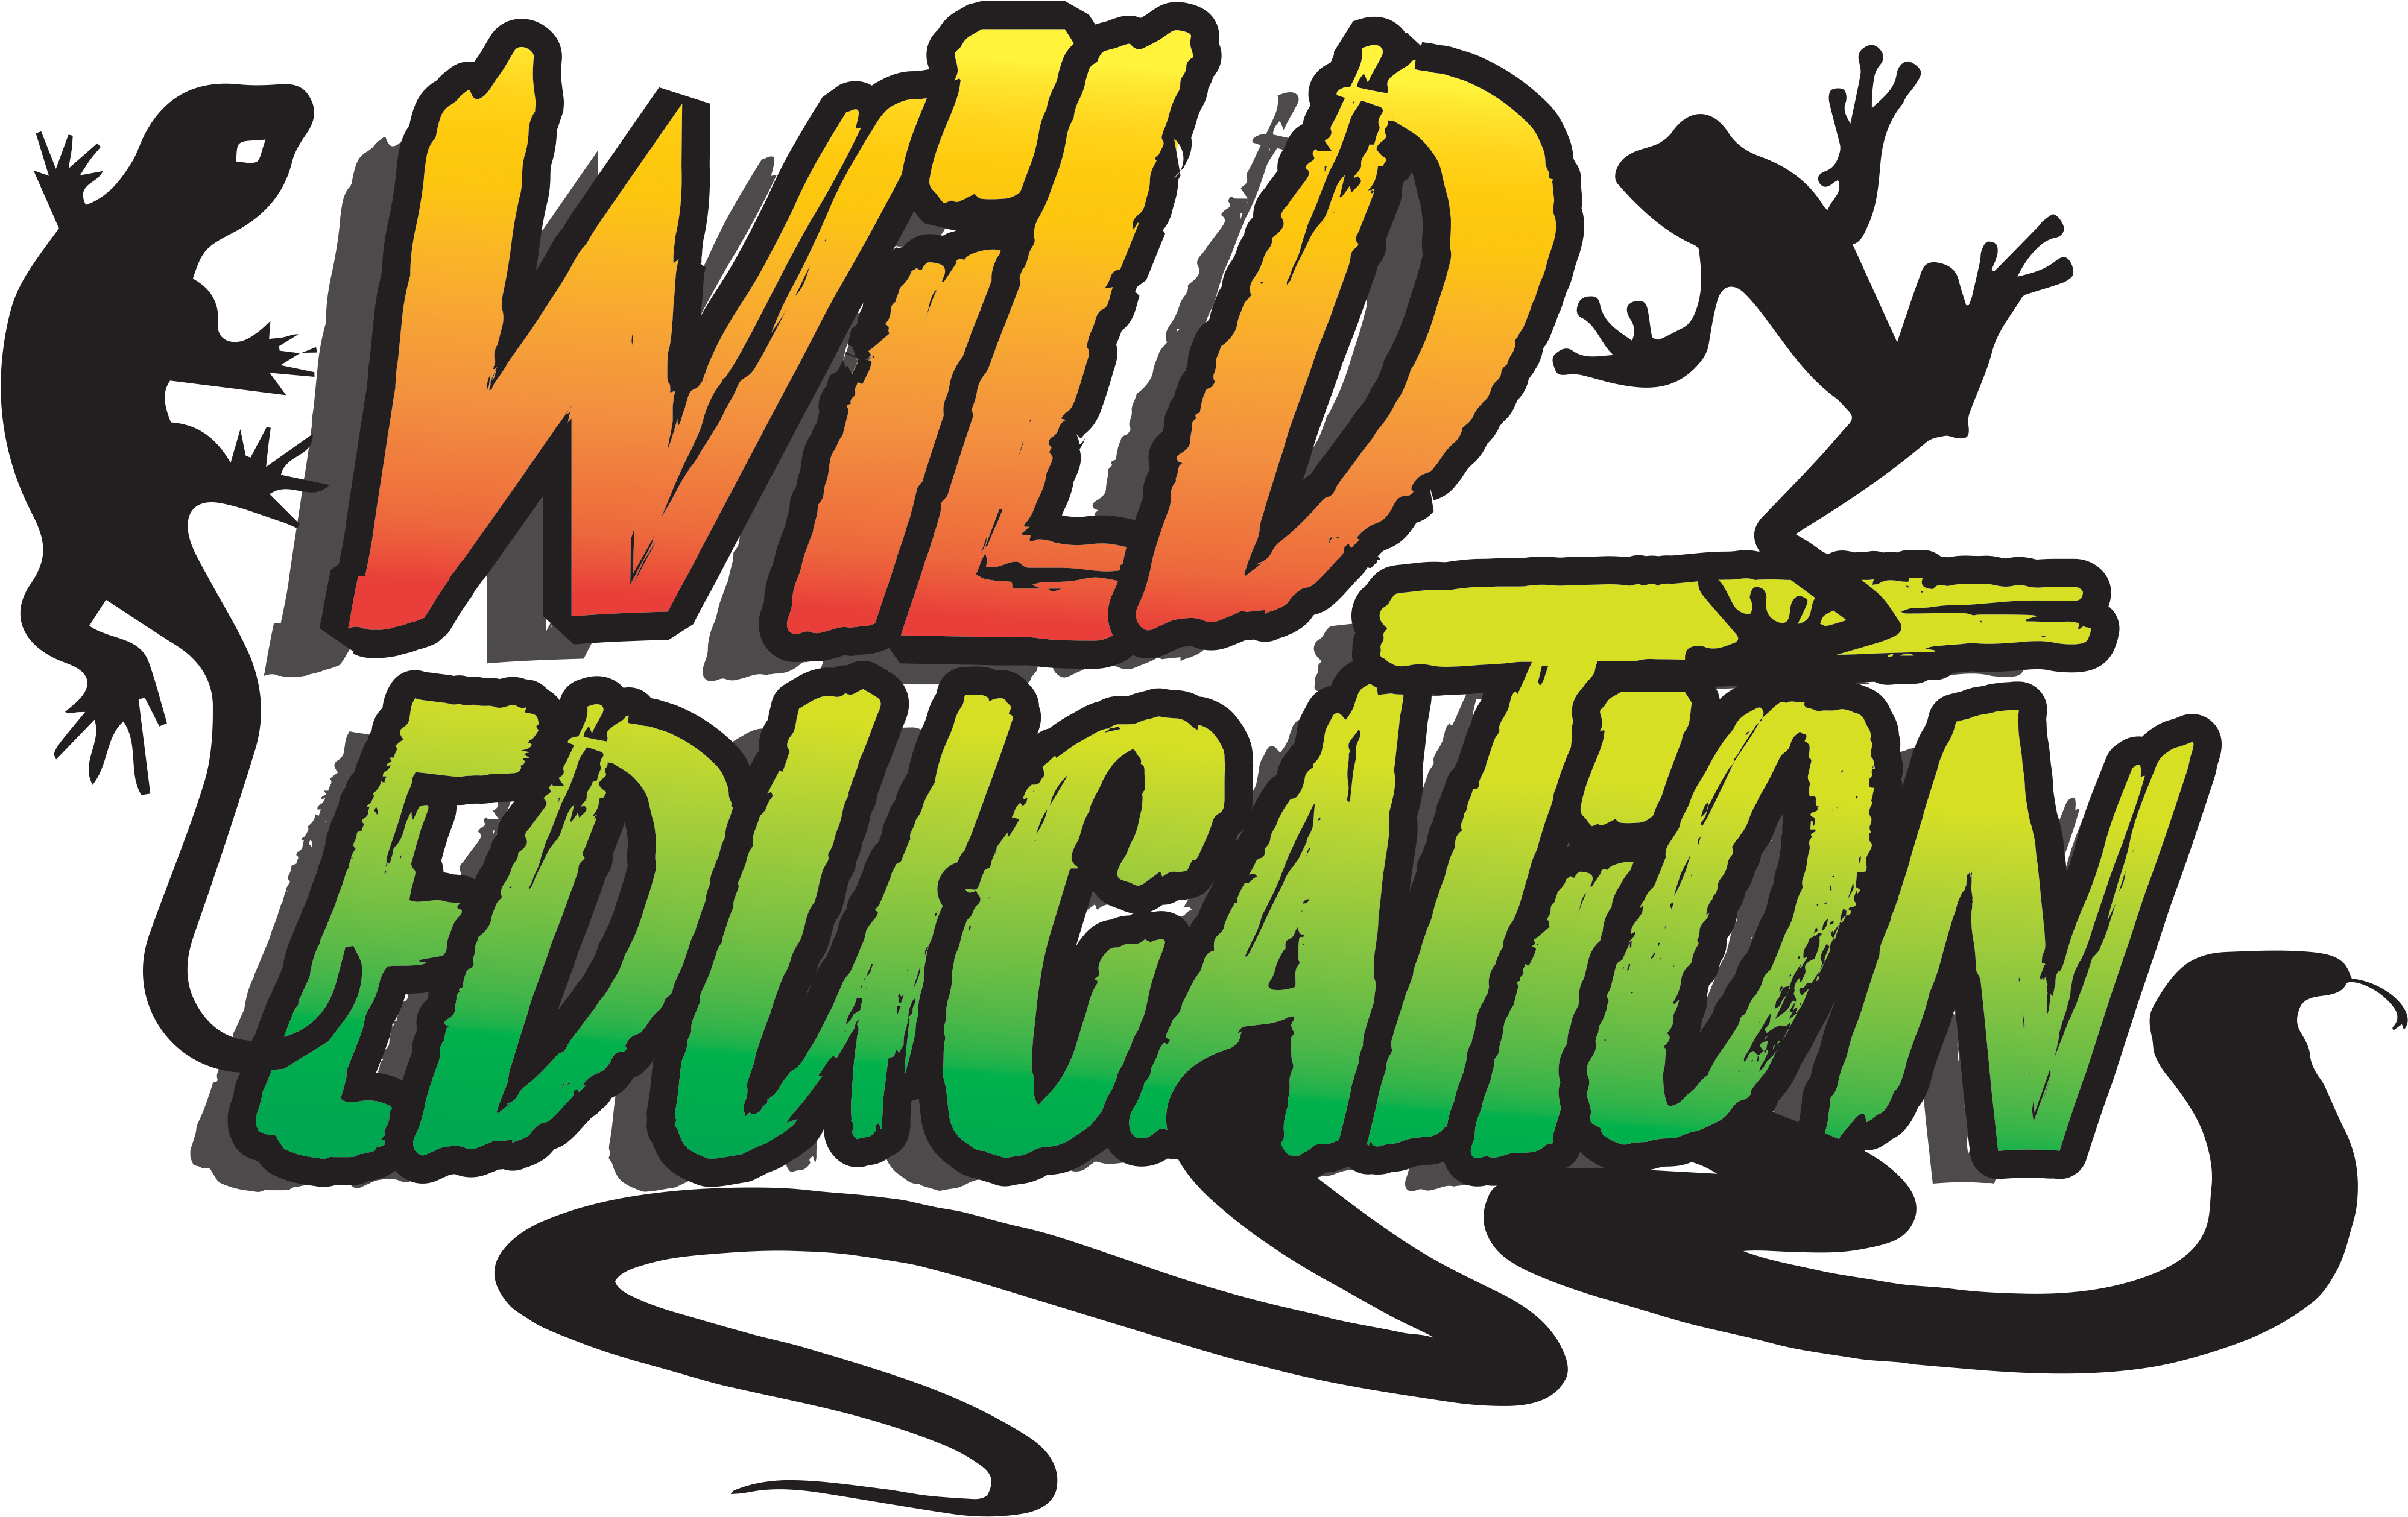 The Reptile Guy - Wild Education (4500x2845)